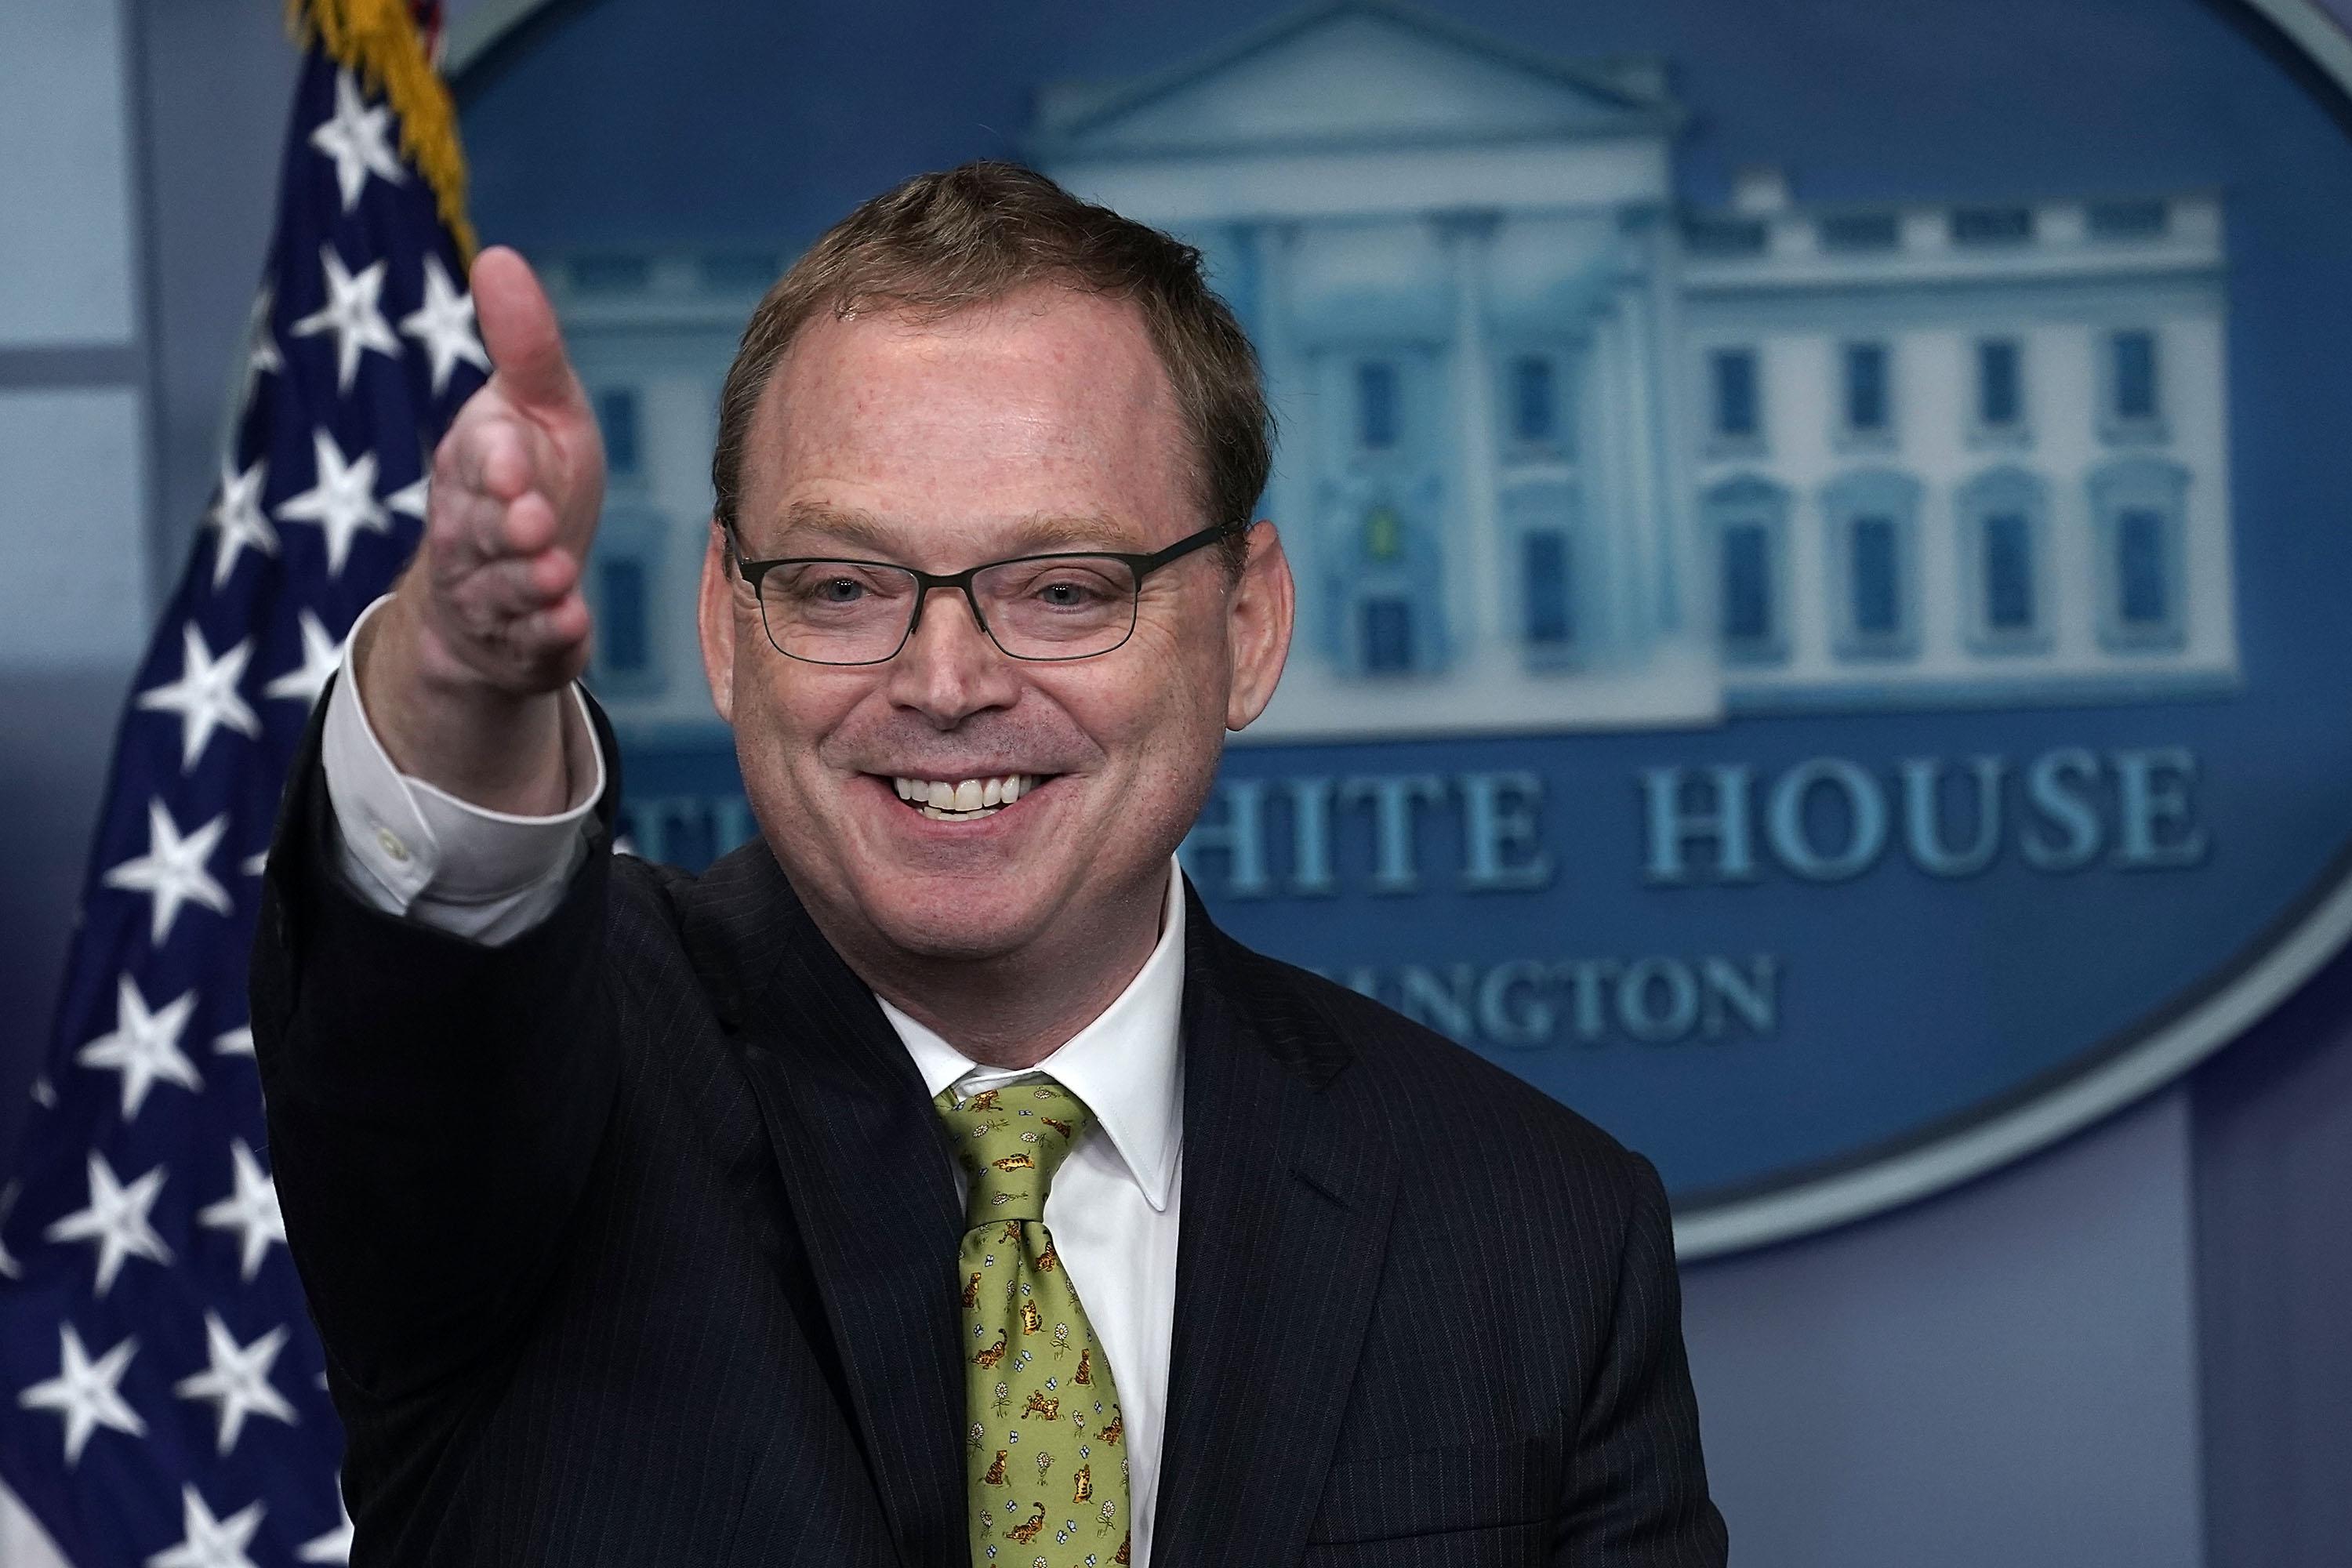 Kevin Hassett takes questions in the White House briefing room.